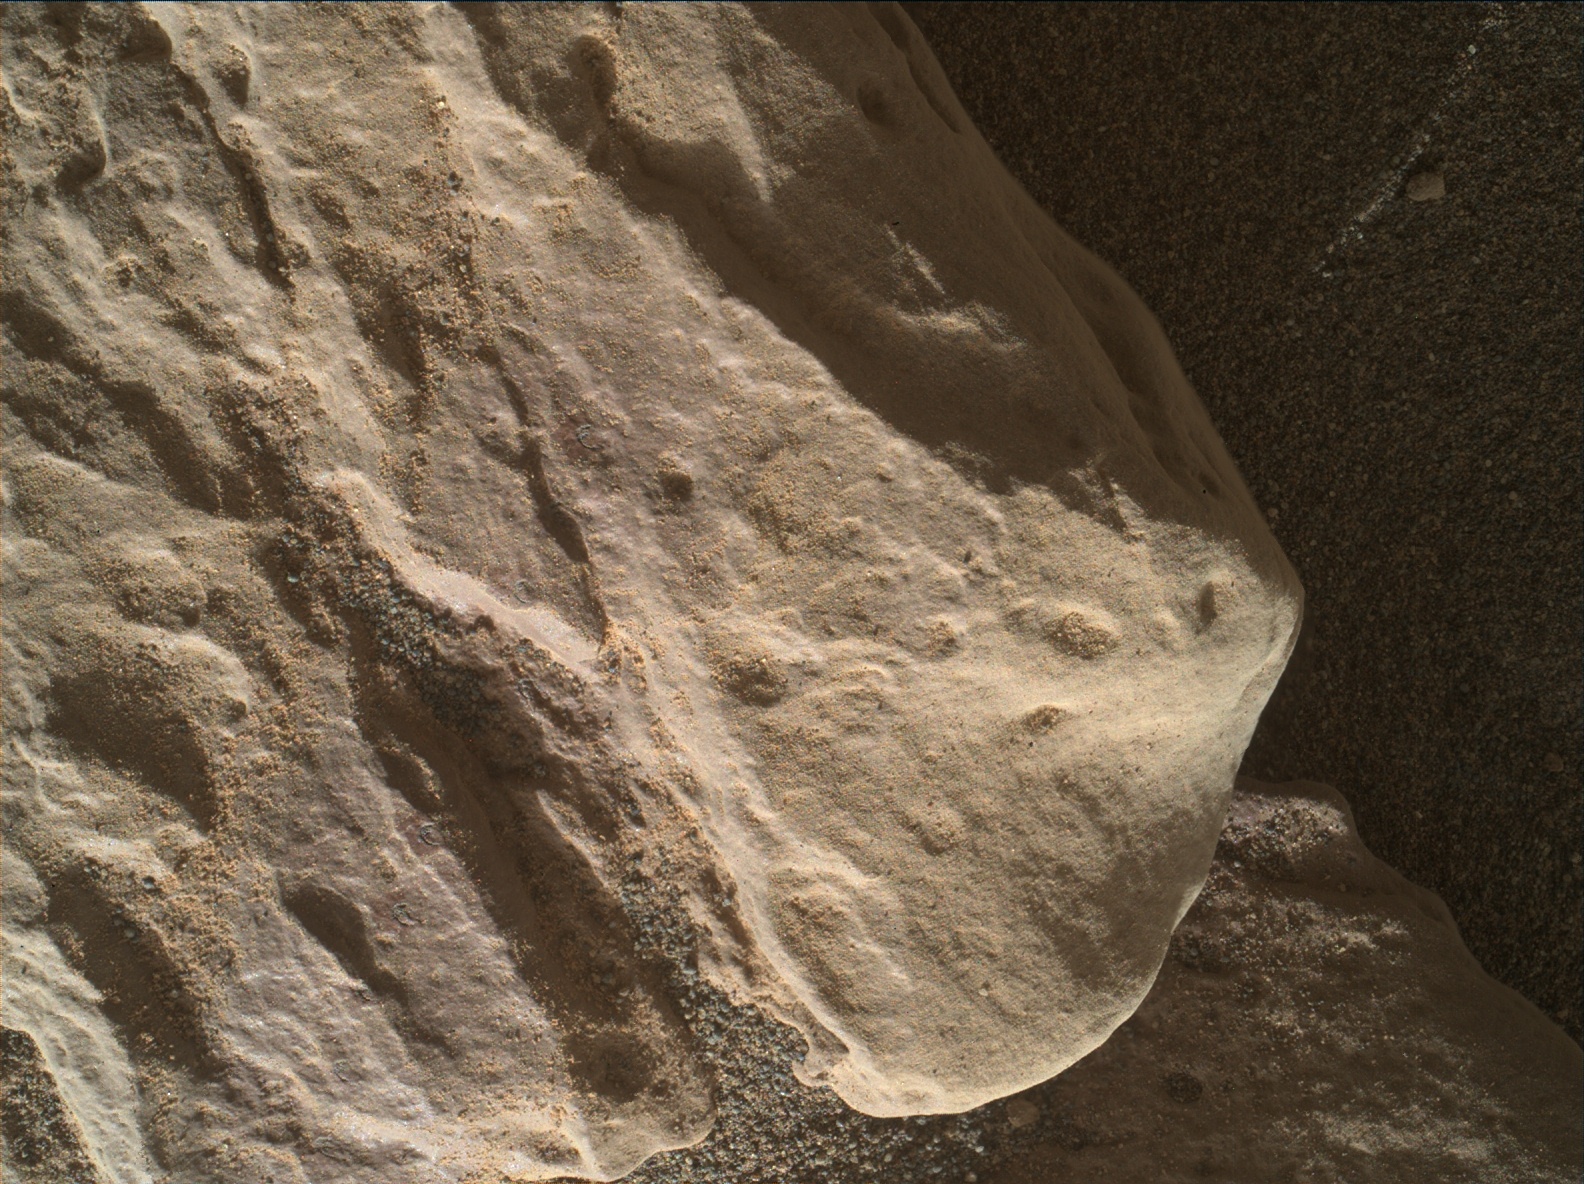 Nasa's Mars rover Curiosity acquired this image using its Mars Hand Lens Imager (MAHLI) on Sol 1949